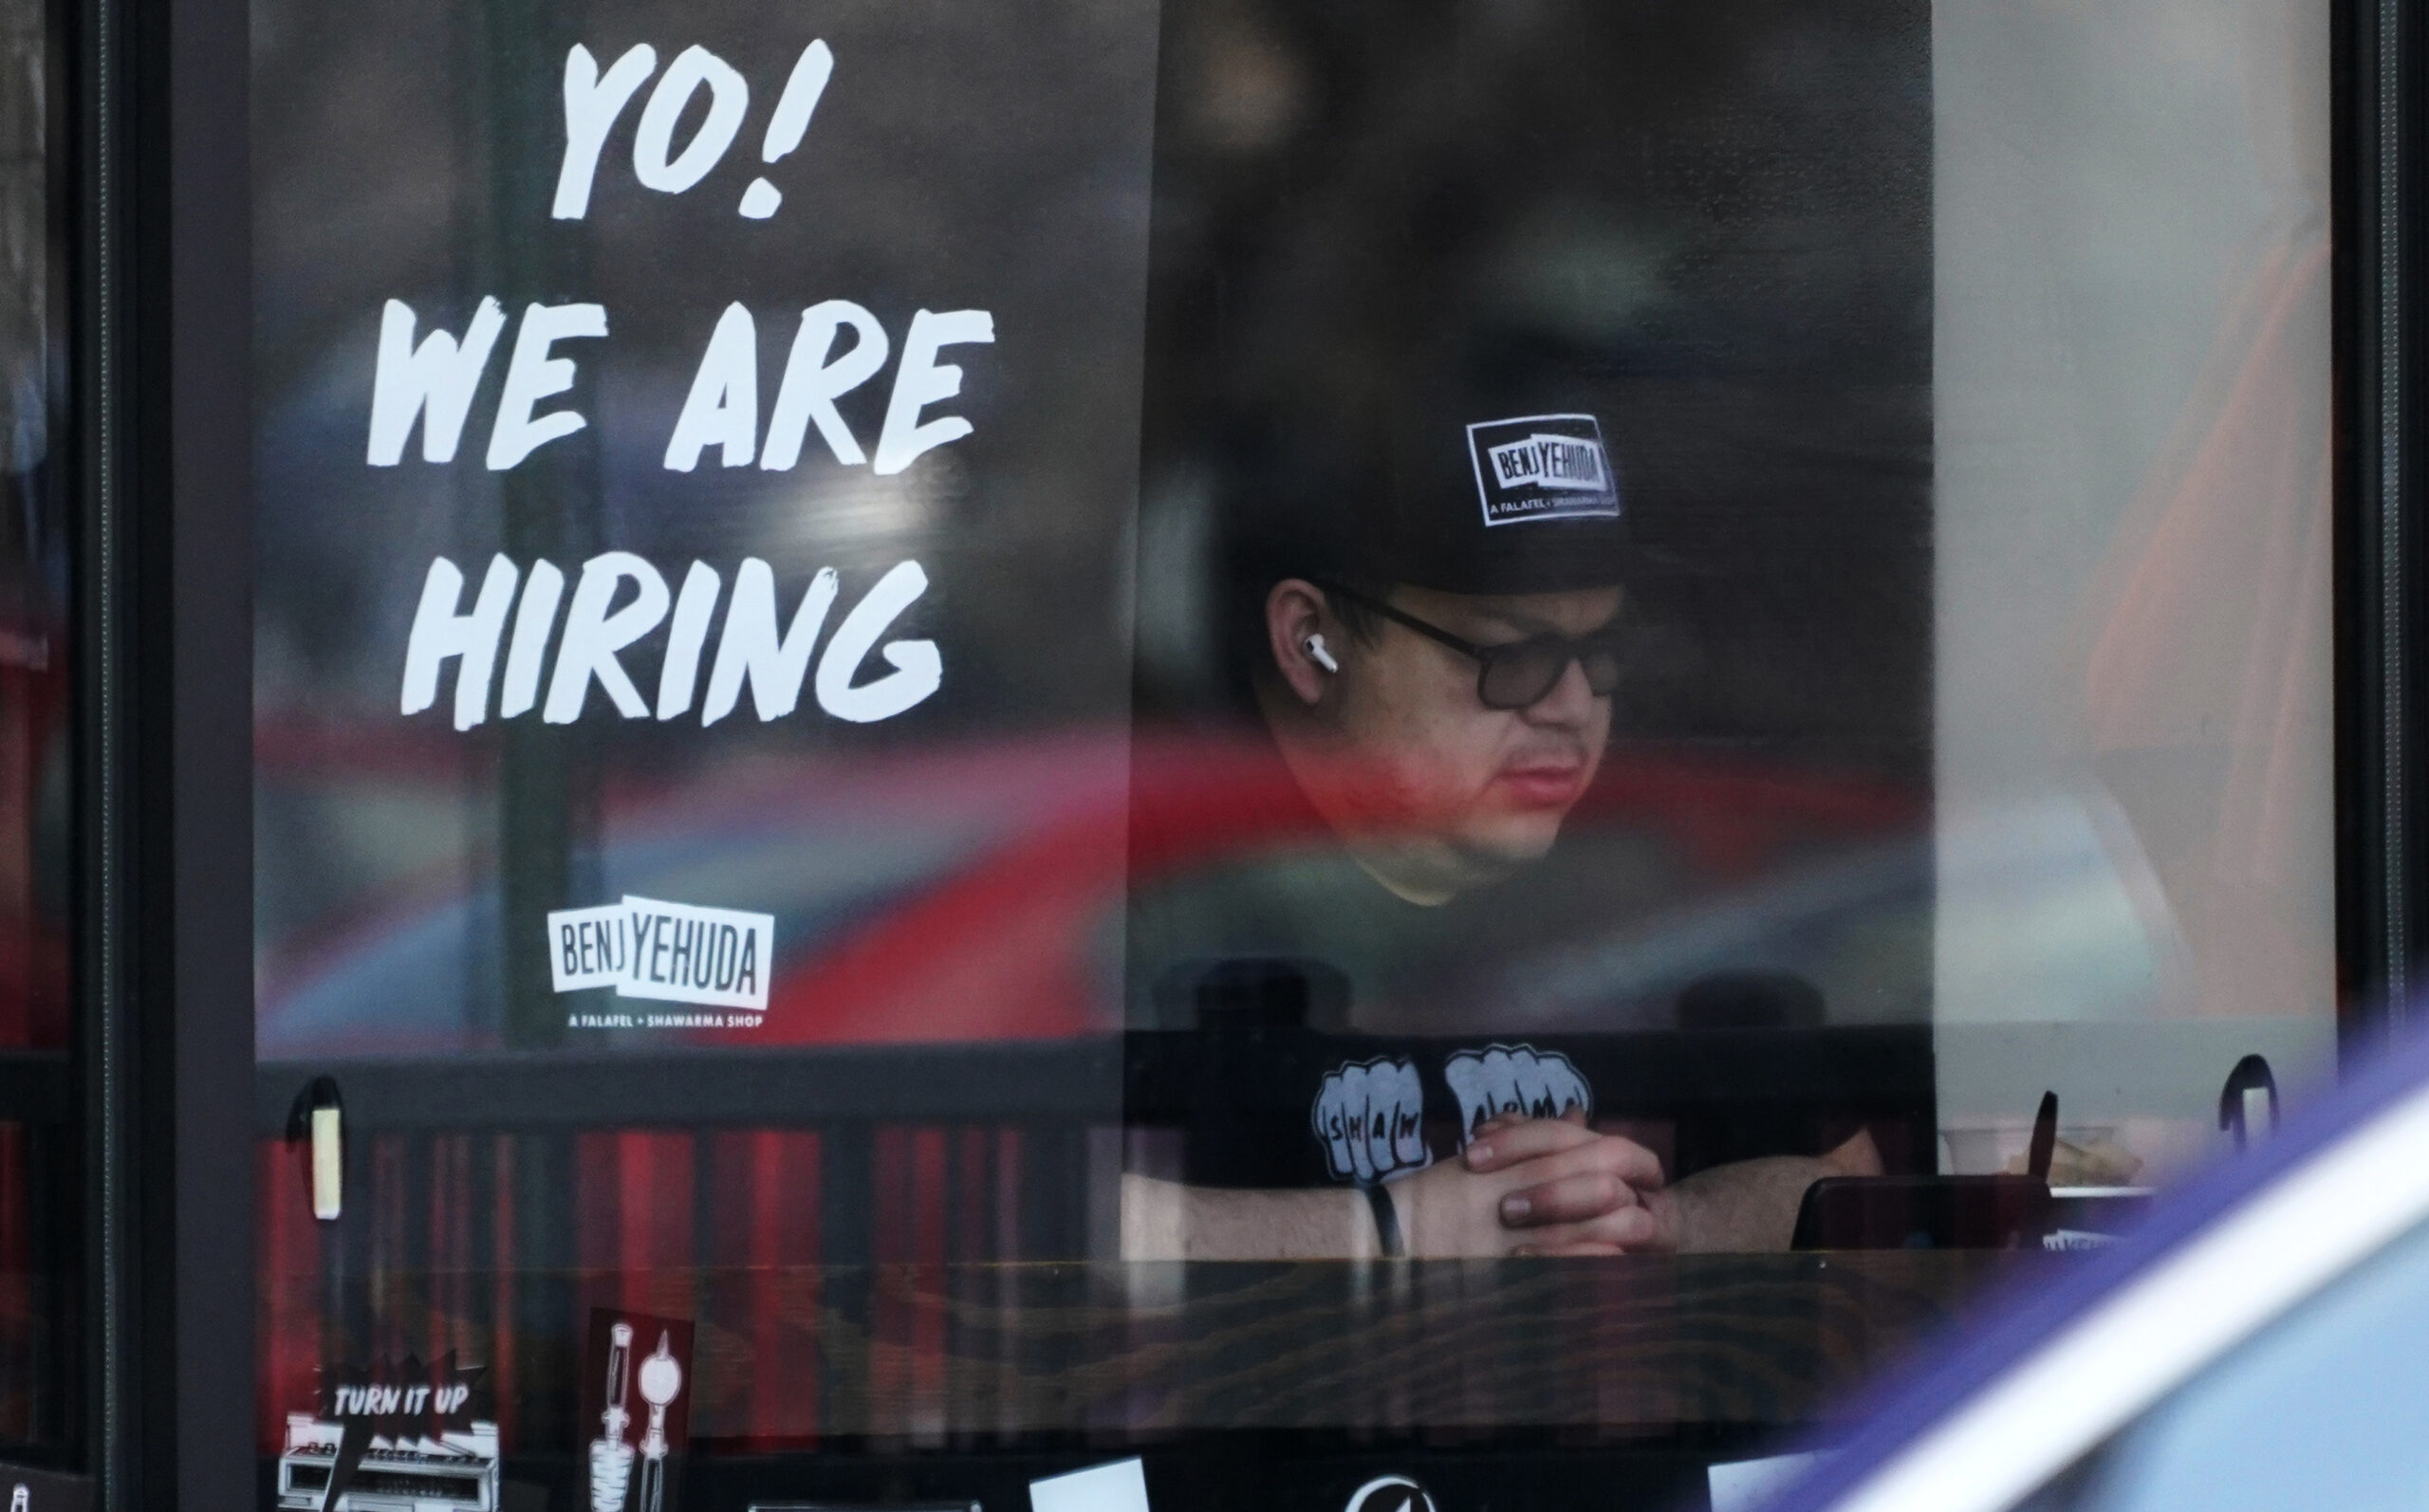 A hiring sign is displayed at a restaurant in Schaumburg, Ill., April 1, 2022. Employers posted a record 11.5 million job openings in March, more evidence of a tight labor market that has emboldened millions of American workers to leave their jobs and contributed to the biggest surge in inflation in four decades. A record 4.5 million Americans quit their jobs in February — a sign that they are confident they can find better pay or working conditions elsewhere. (AP Photo/Nam Y. Huh)